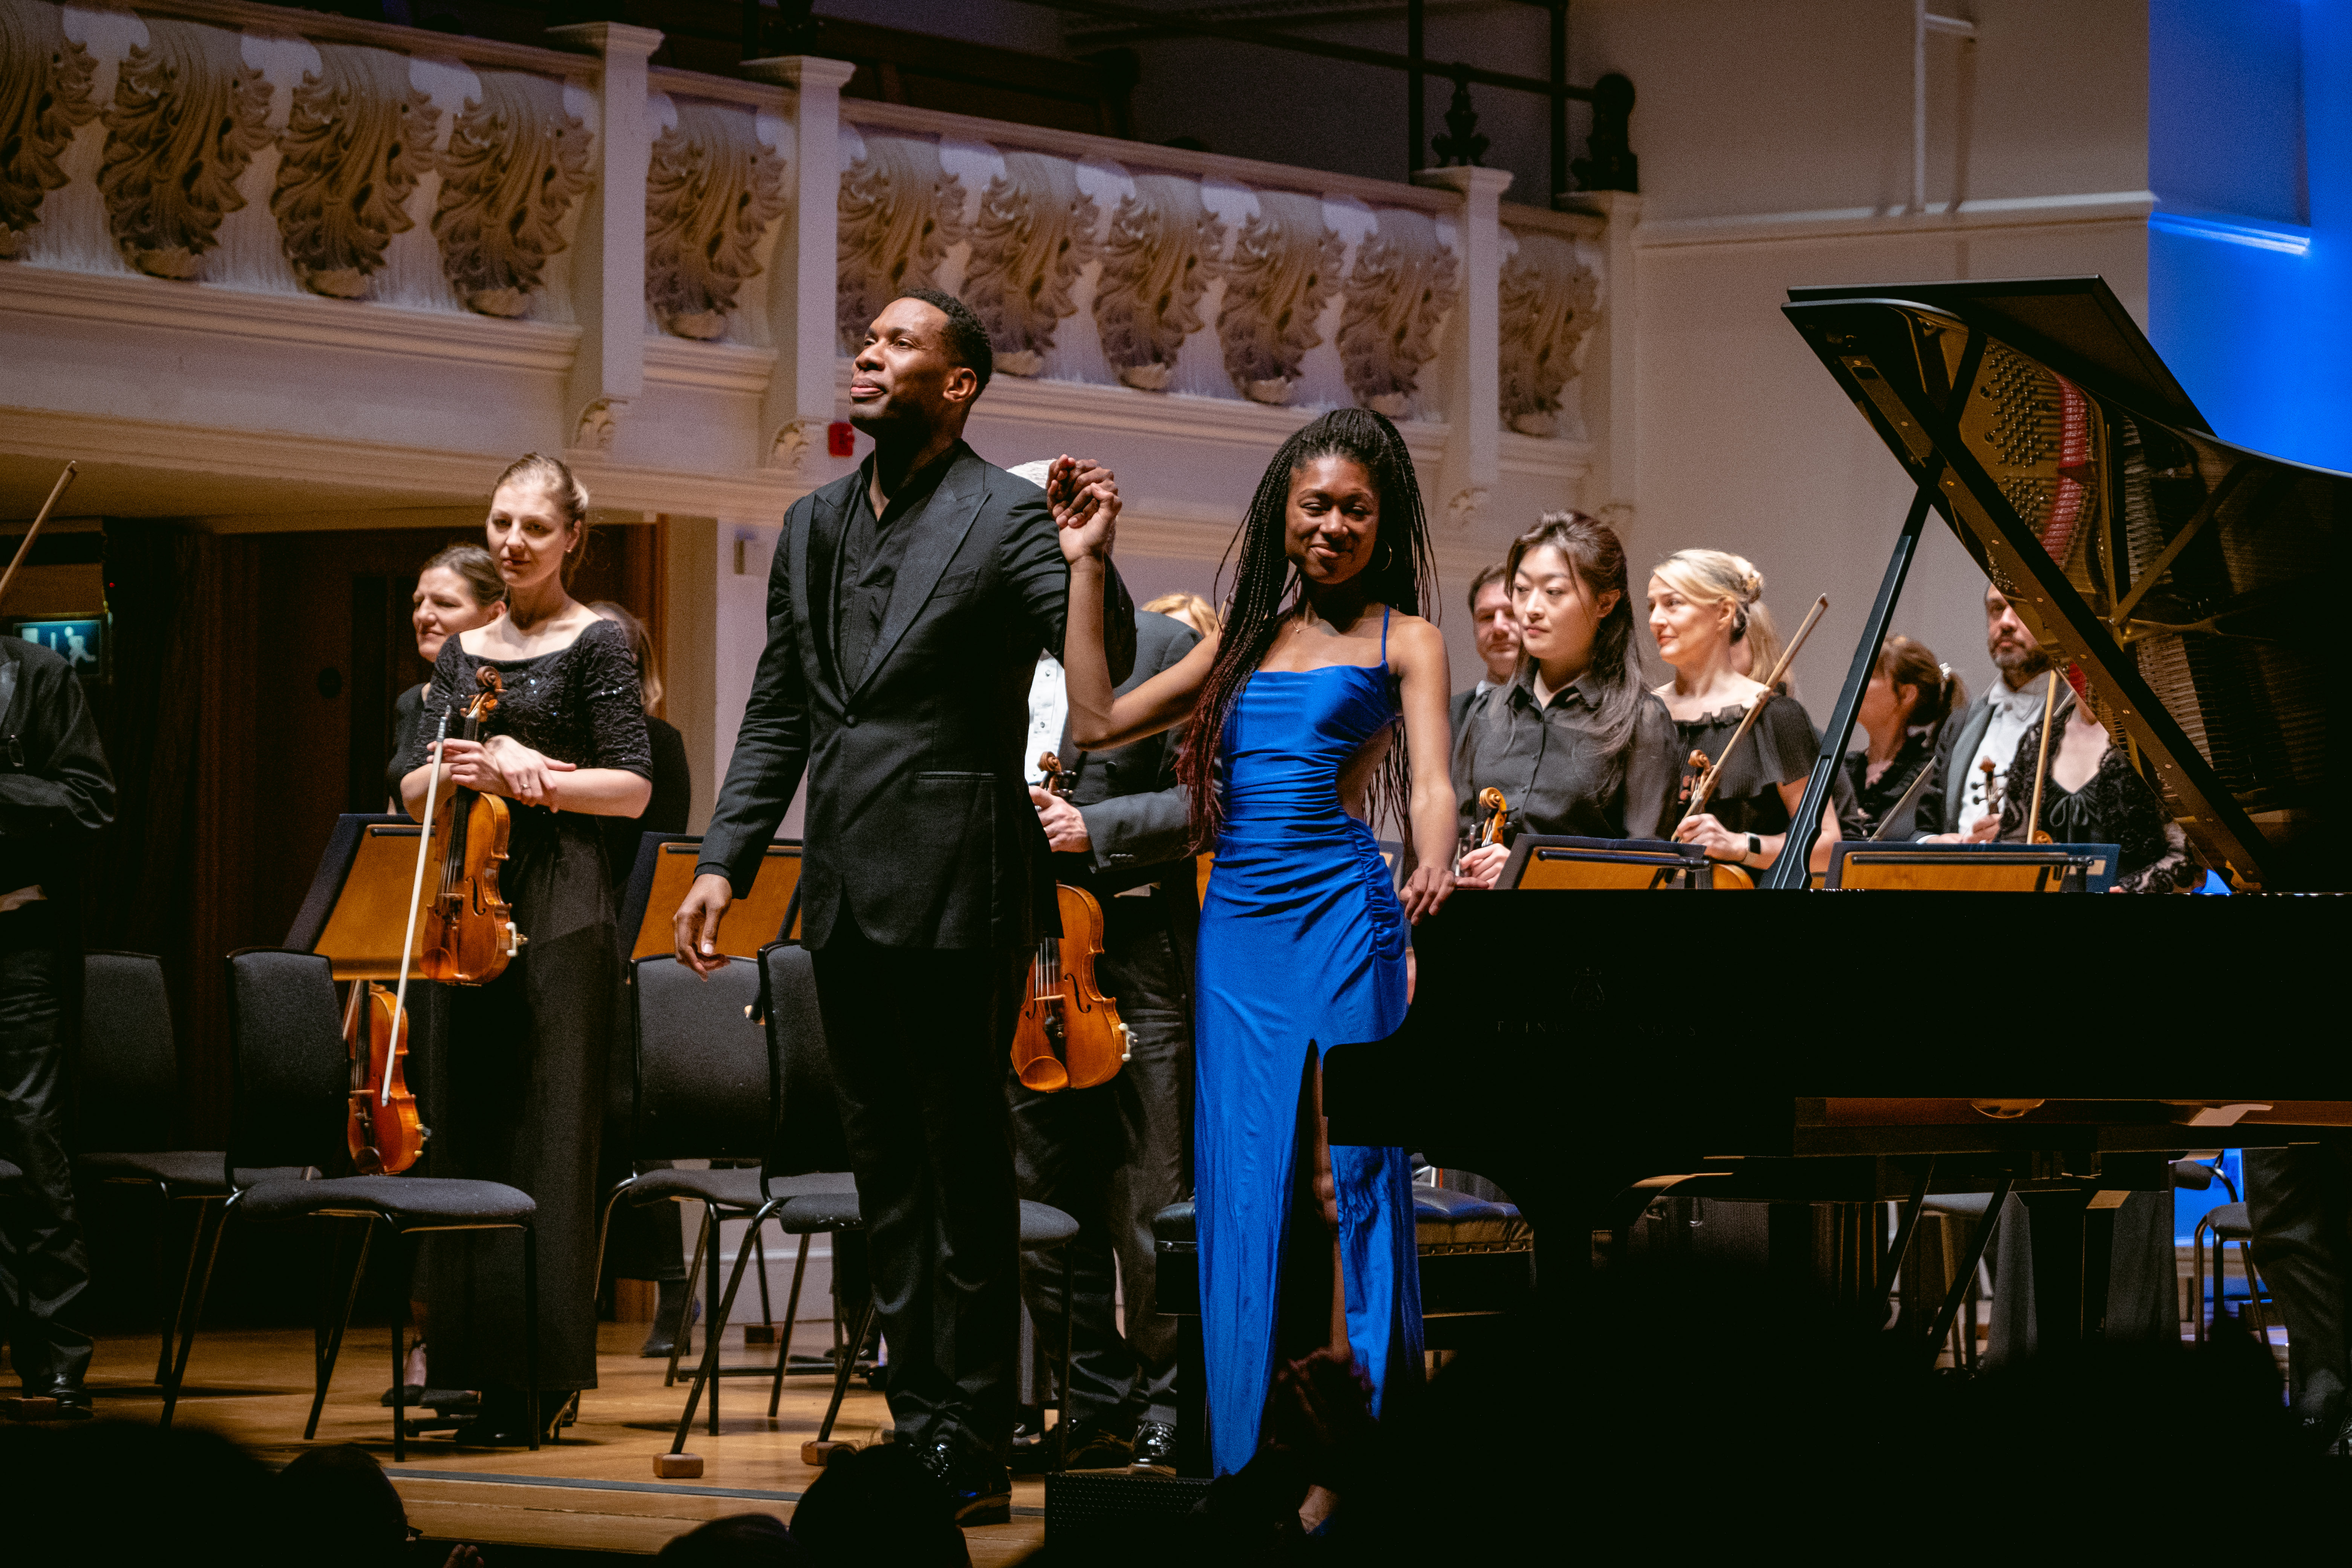 Conductor Roderick Cox and pianist Isata Kanneh-Mason recieving applause on stage